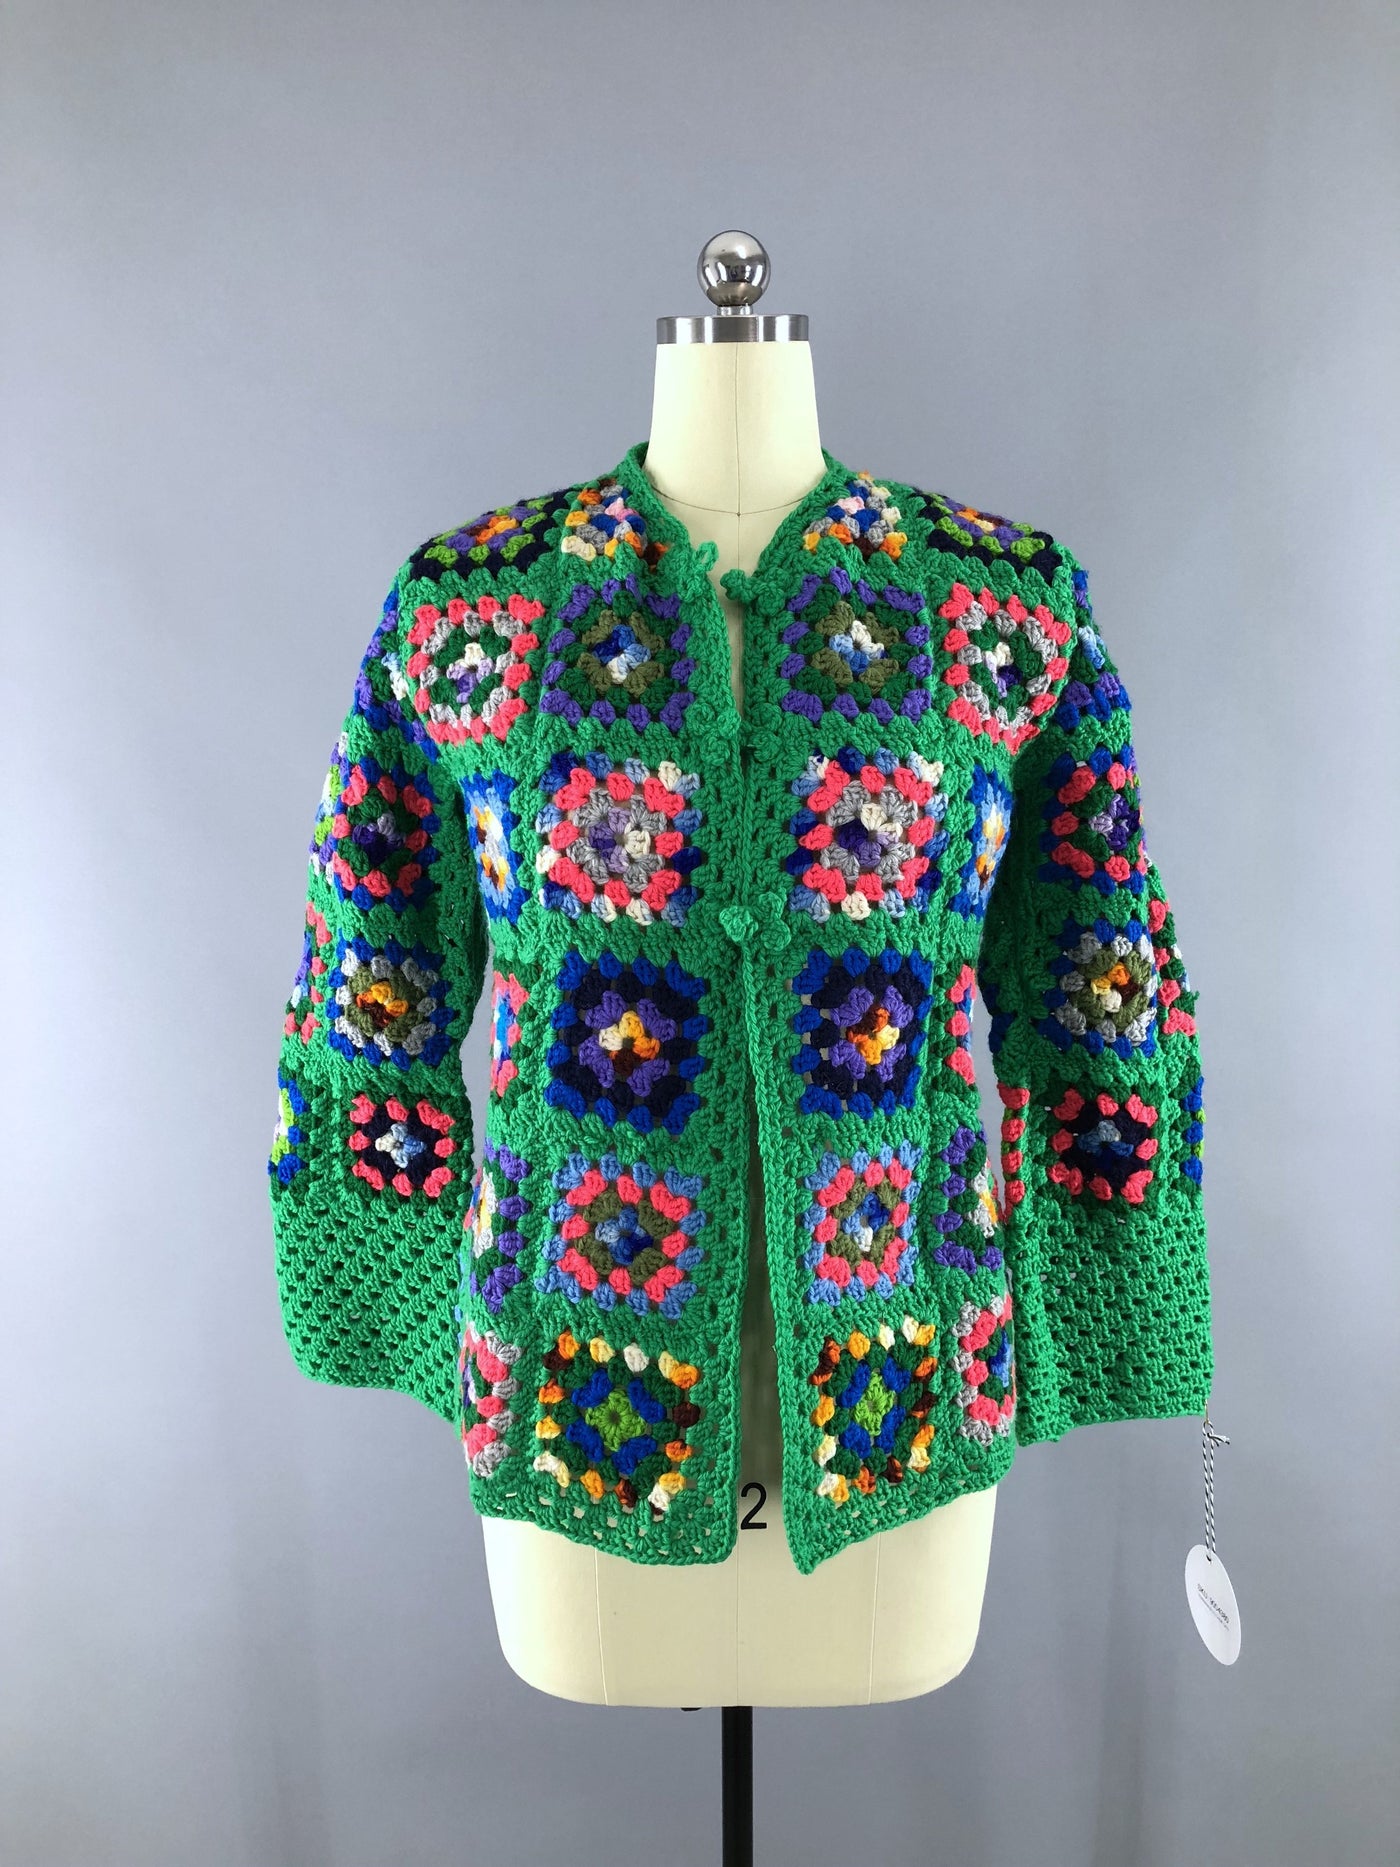 Vintage 1960s Crocheted Cardigan / Green Granny Squares - ThisBlueBird